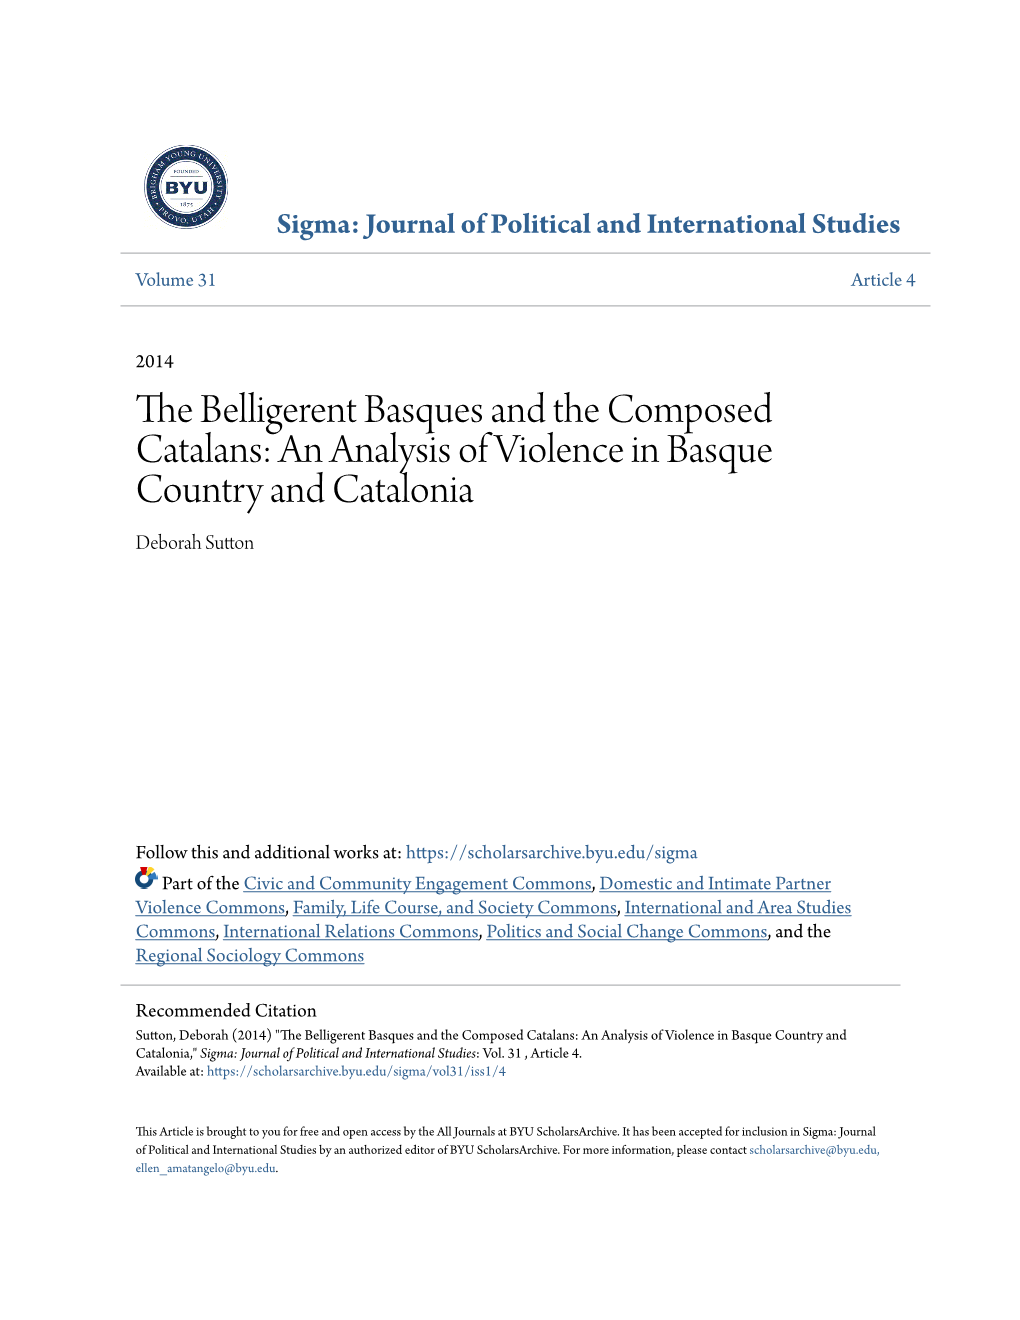 The Belligerent Basques and the Composed Catalans: an Analysis of Violence in Basque Country and Catalonia Deborah Sutton